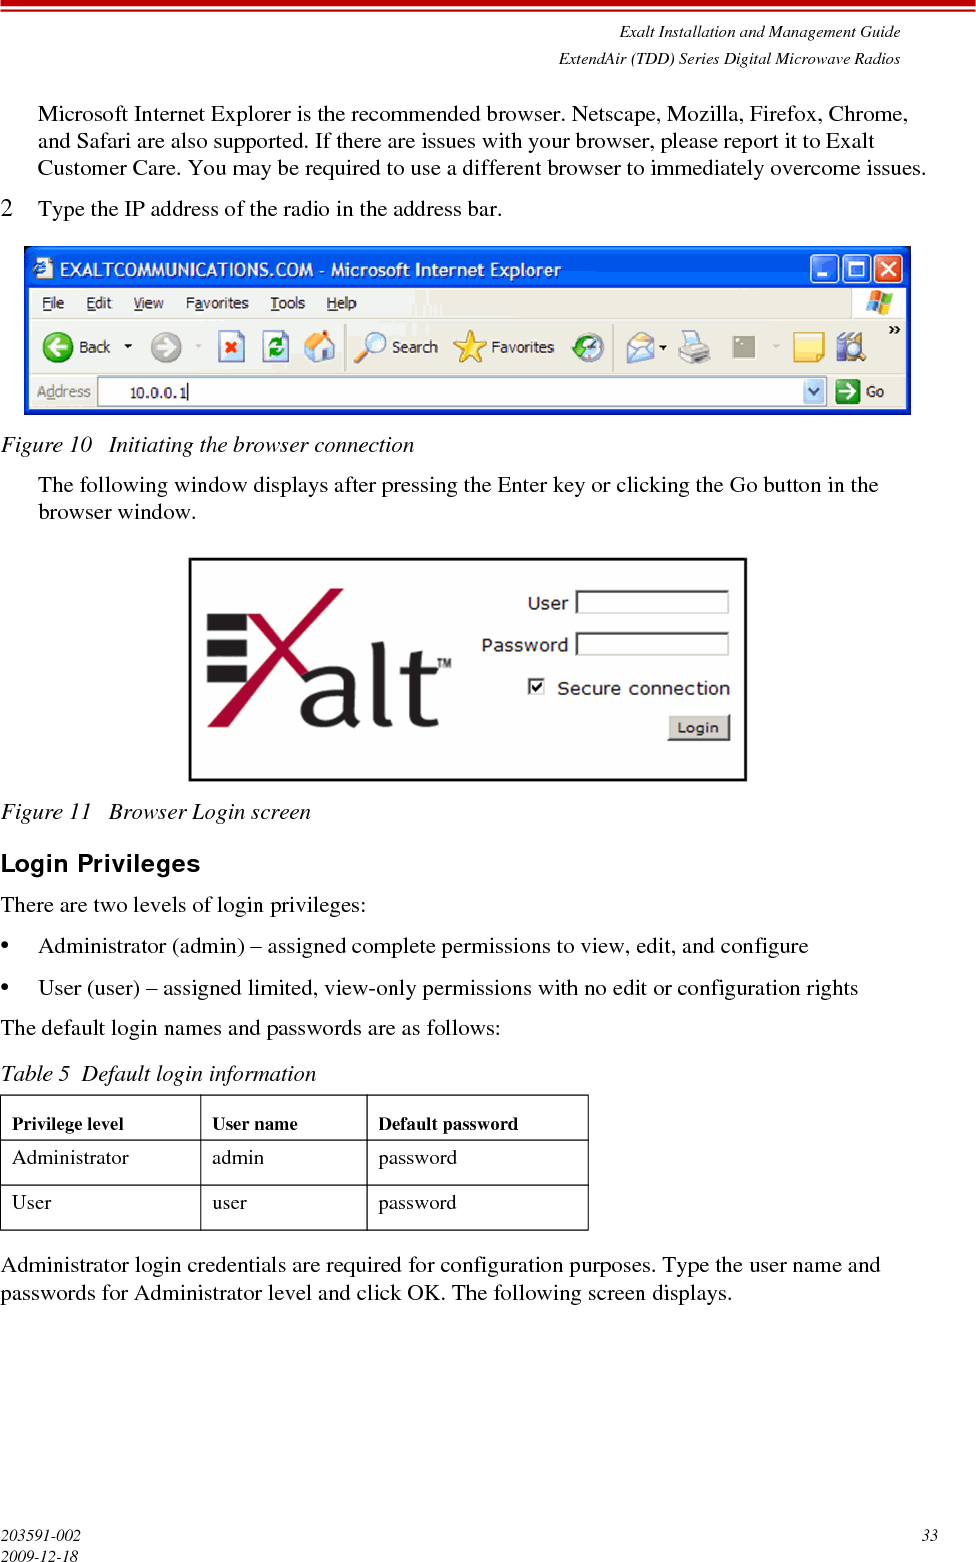 Exalt Installation and Management GuideExtendAir (TDD) Series Digital Microwave Radios203591-002 332009-12-18Microsoft Internet Explorer is the recommended browser. Netscape, Mozilla, Firefox, Chrome, and Safari are also supported. If there are issues with your browser, please report it to Exalt Customer Care. You may be required to use a different browser to immediately overcome issues.2Type the IP address of the radio in the address bar.Figure 10   Initiating the browser connectionThe following window displays after pressing the Enter key or clicking the Go button in the browser window.Figure 11   Browser Login screenLogin PrivilegesThere are two levels of login privileges:•Administrator (admin) – assigned complete permissions to view, edit, and configure•User (user) – assigned limited, view-only permissions with no edit or configuration rightsThe default login names and passwords are as follows:Administrator login credentials are required for configuration purposes. Type the user name and passwords for Administrator level and click OK. The following screen displays.Table 5  Default login informationPrivilege level User name Default passwordAdministrator admin passwordUser user password